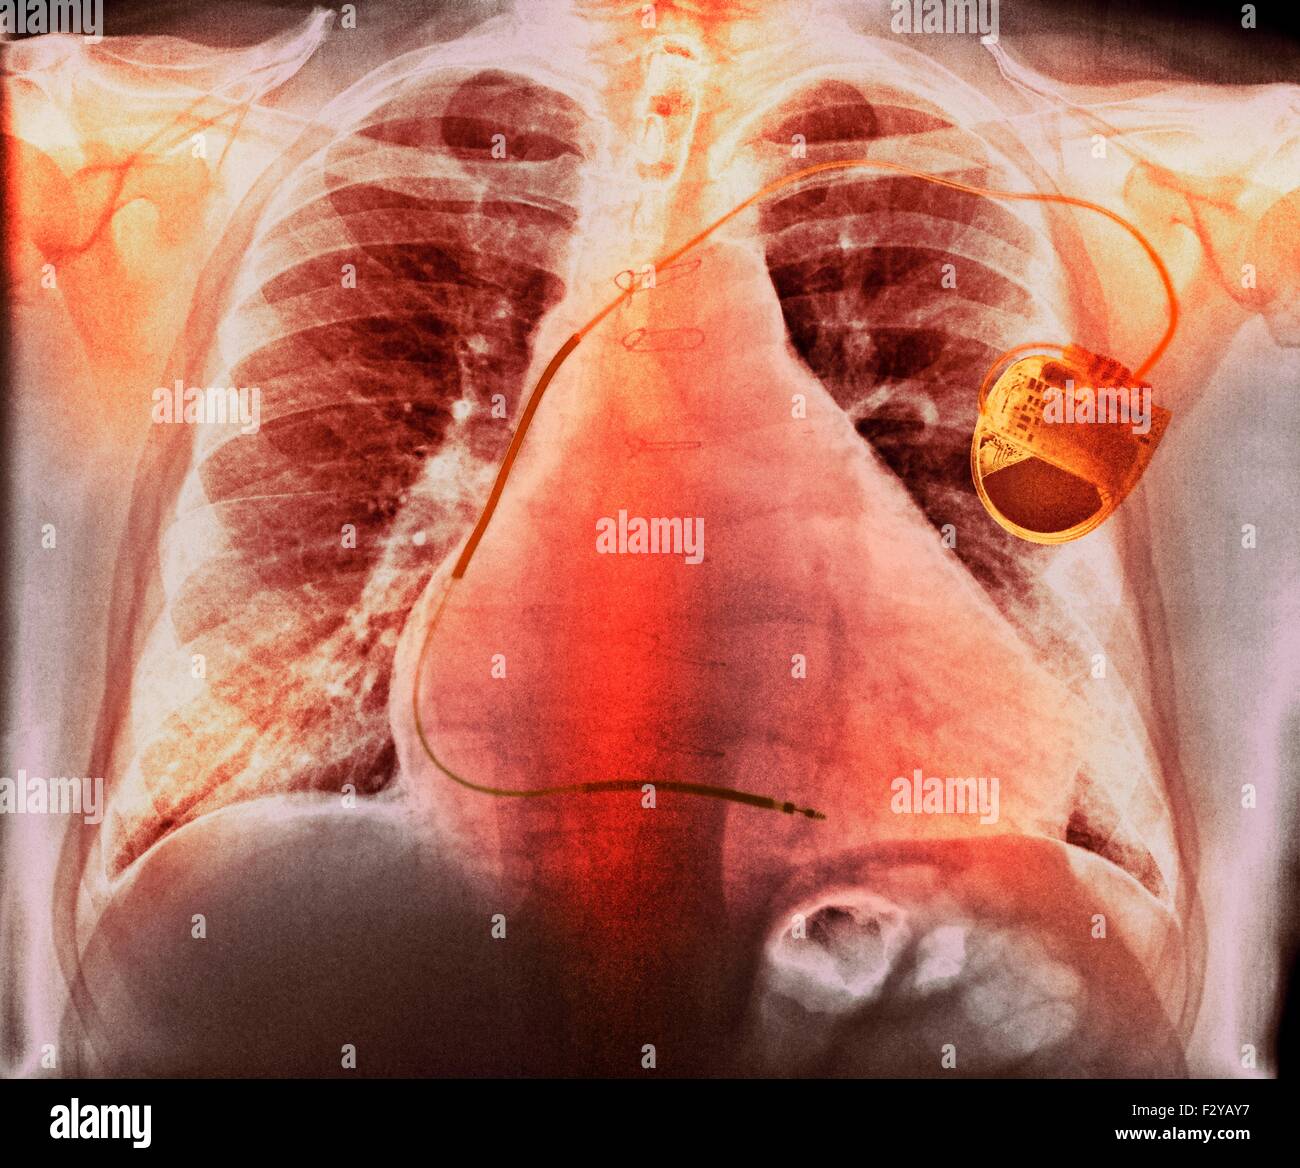 Pacemaker in heart disease. Coloured chest X-ray showing a pacemaker (right) fitted to a 73-year-old male patient with an enlarged heart (cardiomegaly) atrial fibrillation, ischaemic heart disease and chronic obstructive pulmonary disease (COPD). A pacemaker supplies electrical impulses to the heart to maintain the heartbeat at a regular rate. It may be external (worn on a belt) or internal (implanted in the chest, as here). Stock Photo